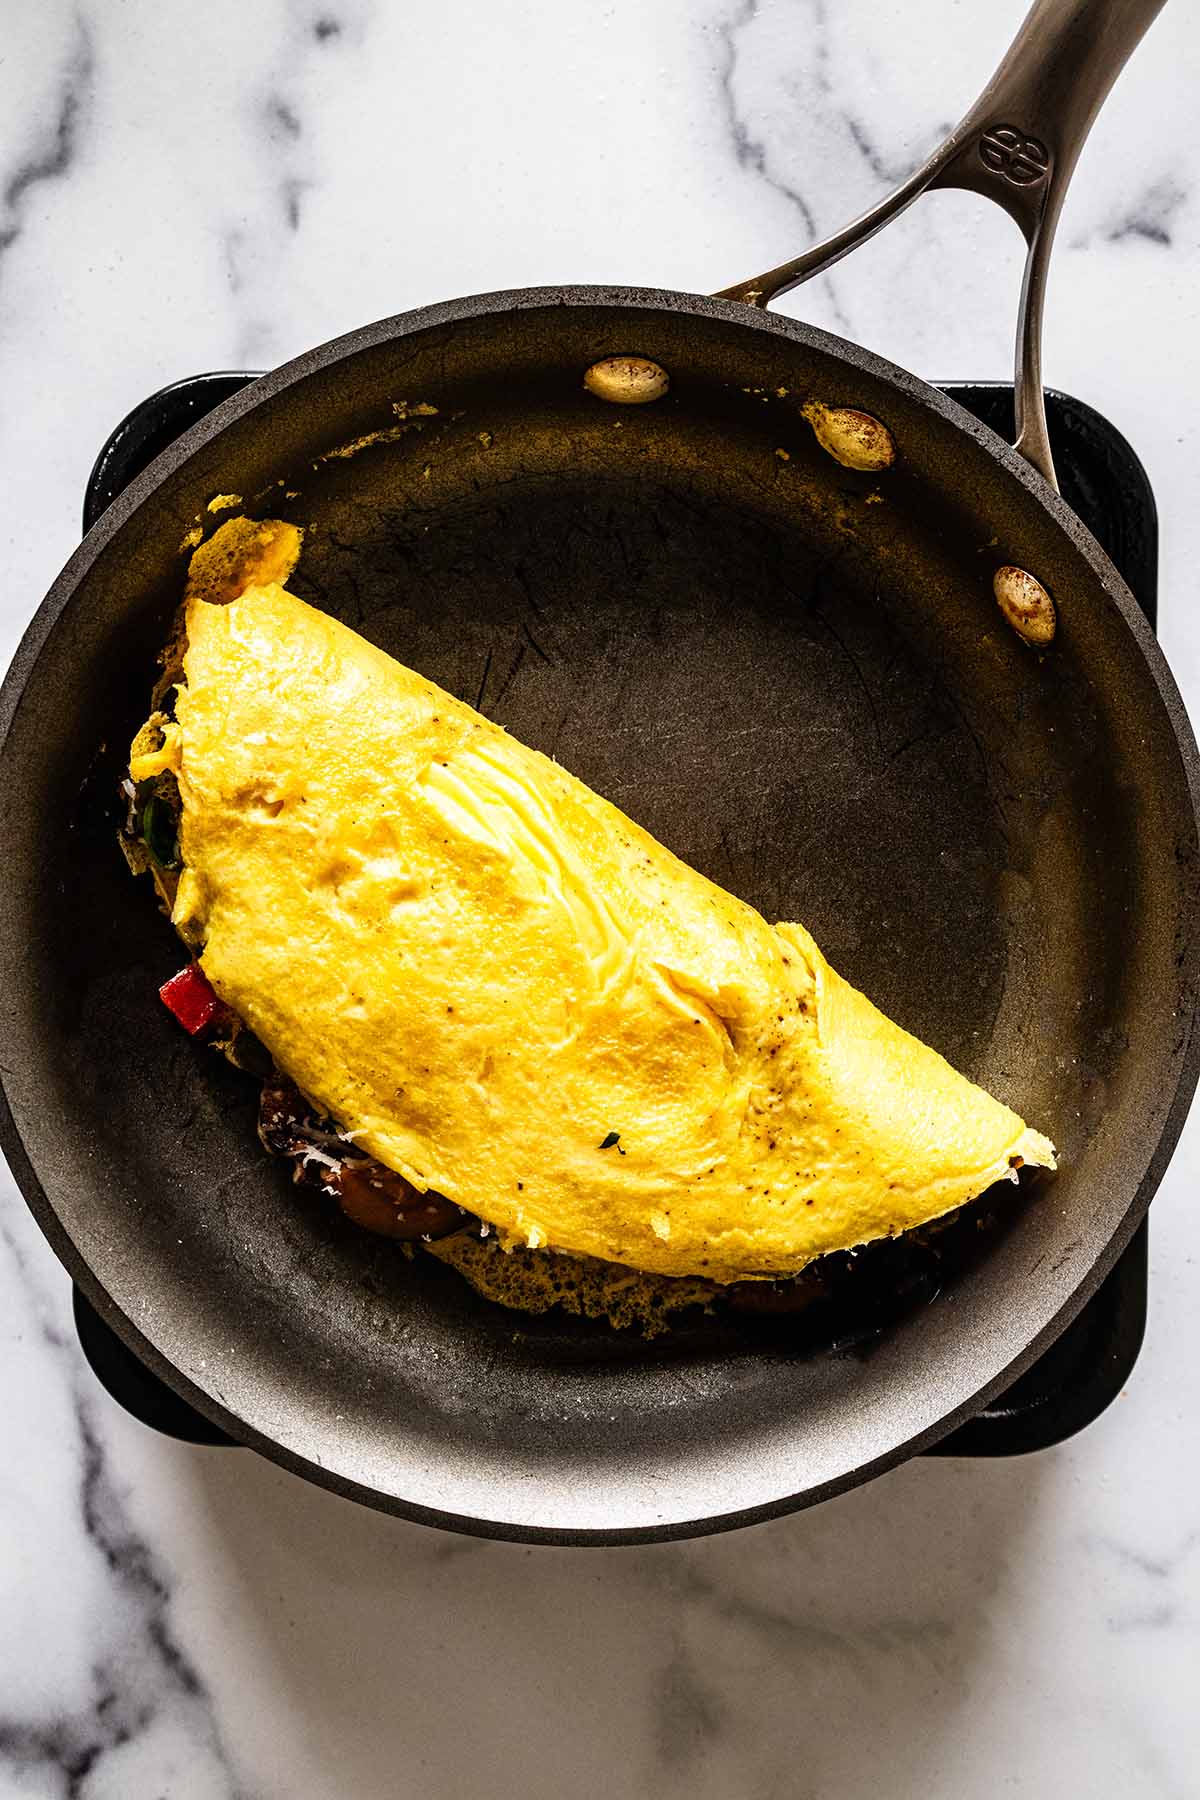 Folded omelette cooking in a skillet